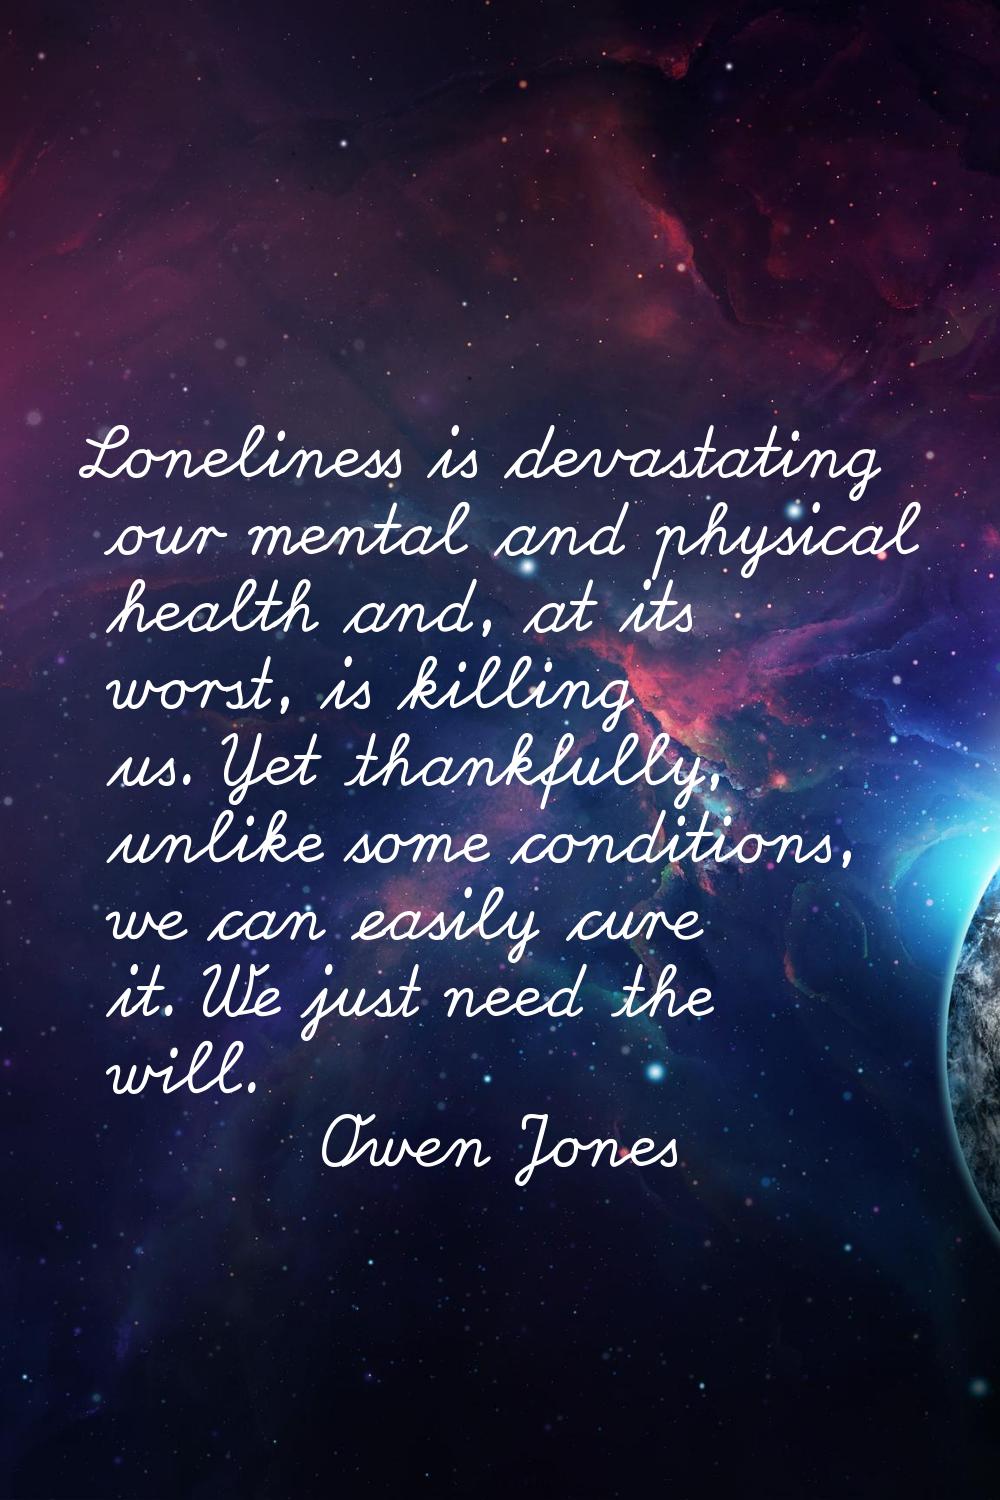 Loneliness is devastating our mental and physical health and, at its worst, is killing us. Yet than